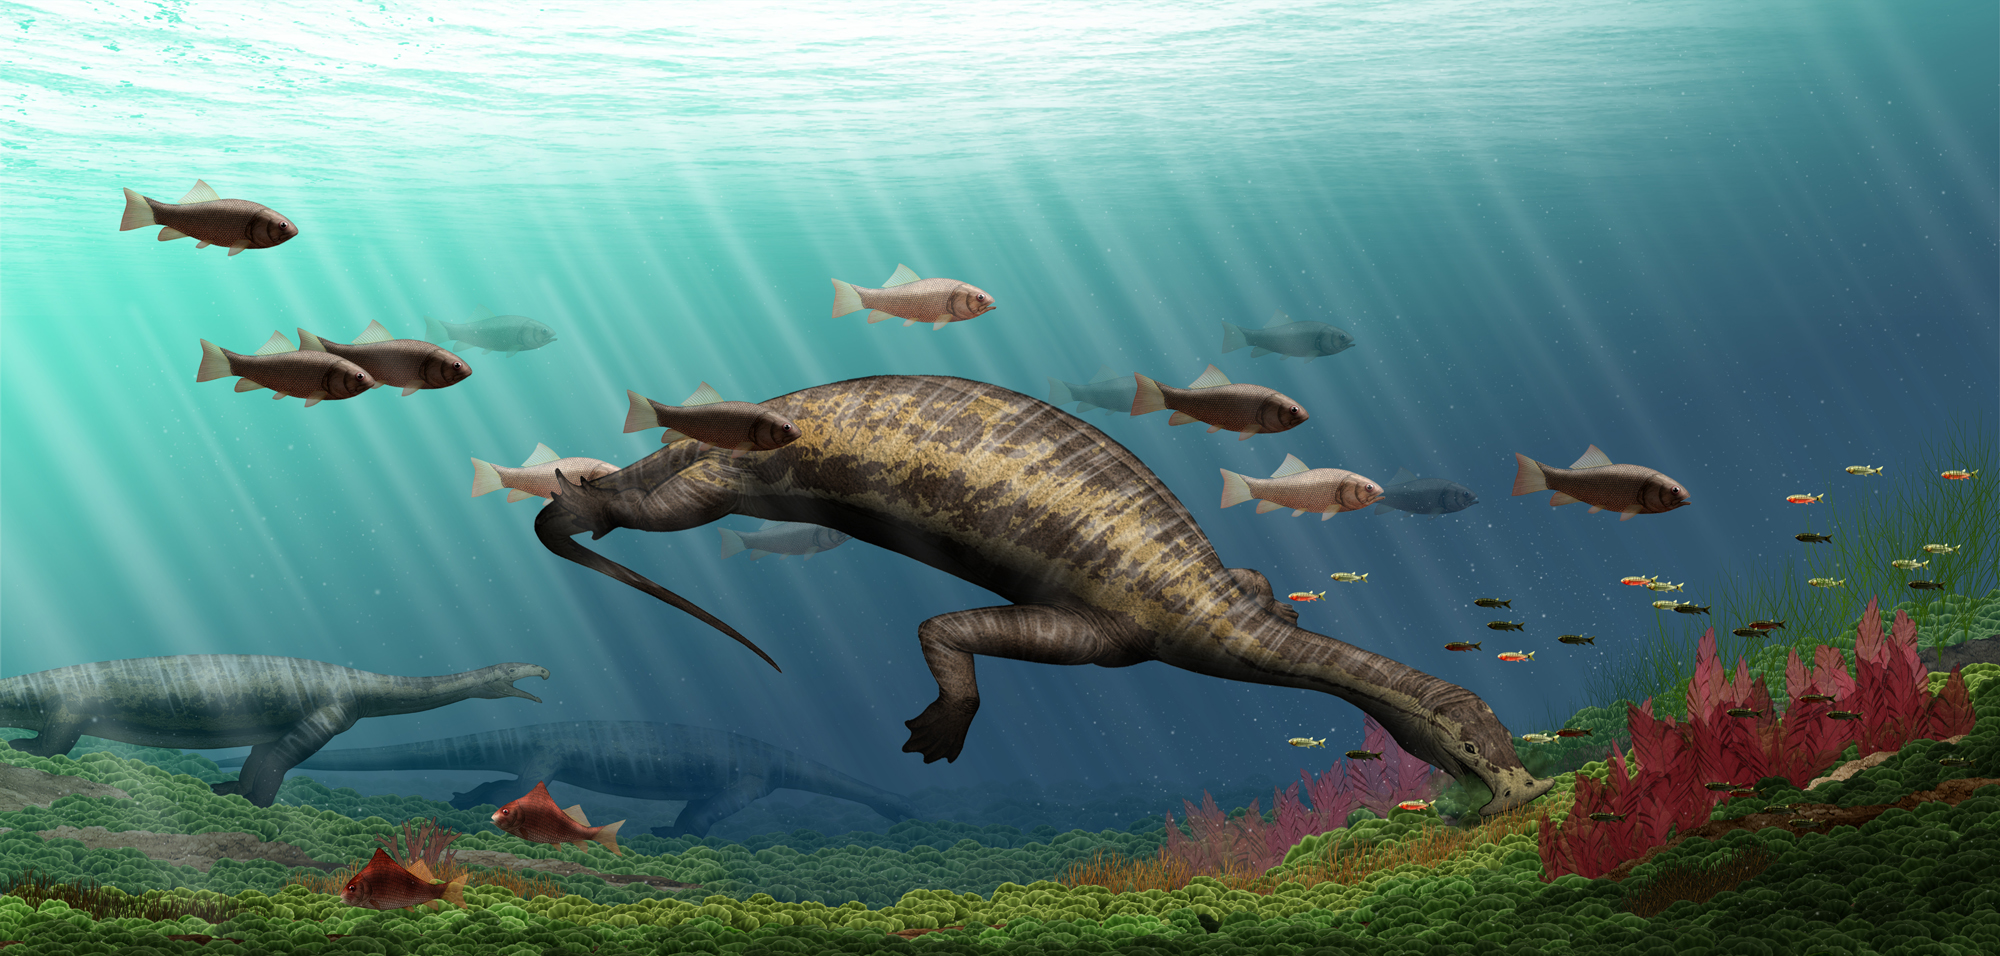 An artistic rendering of an under water scene, featuring the crocodile-sized sea-dwelling reptile, Atopodentatus unicus, swimming with prehistoric fish.